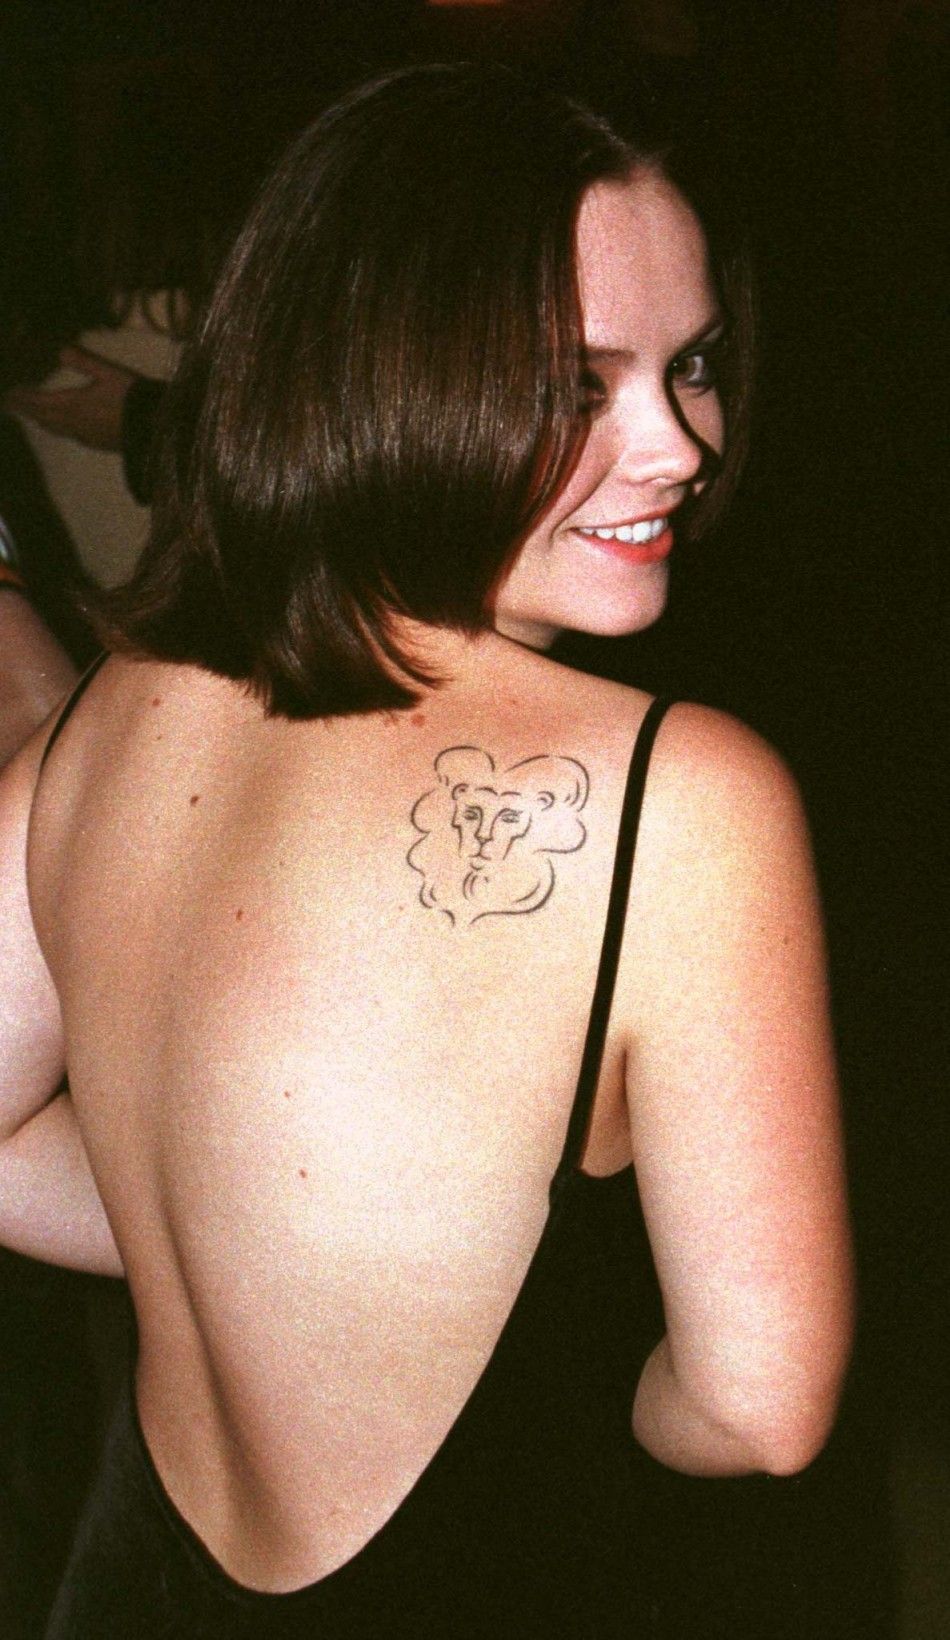 Actress Christina Ricci shows off her tattoo of a lions head at the premiere of her new film quotPecker,quot September 22 in Santa Monica.